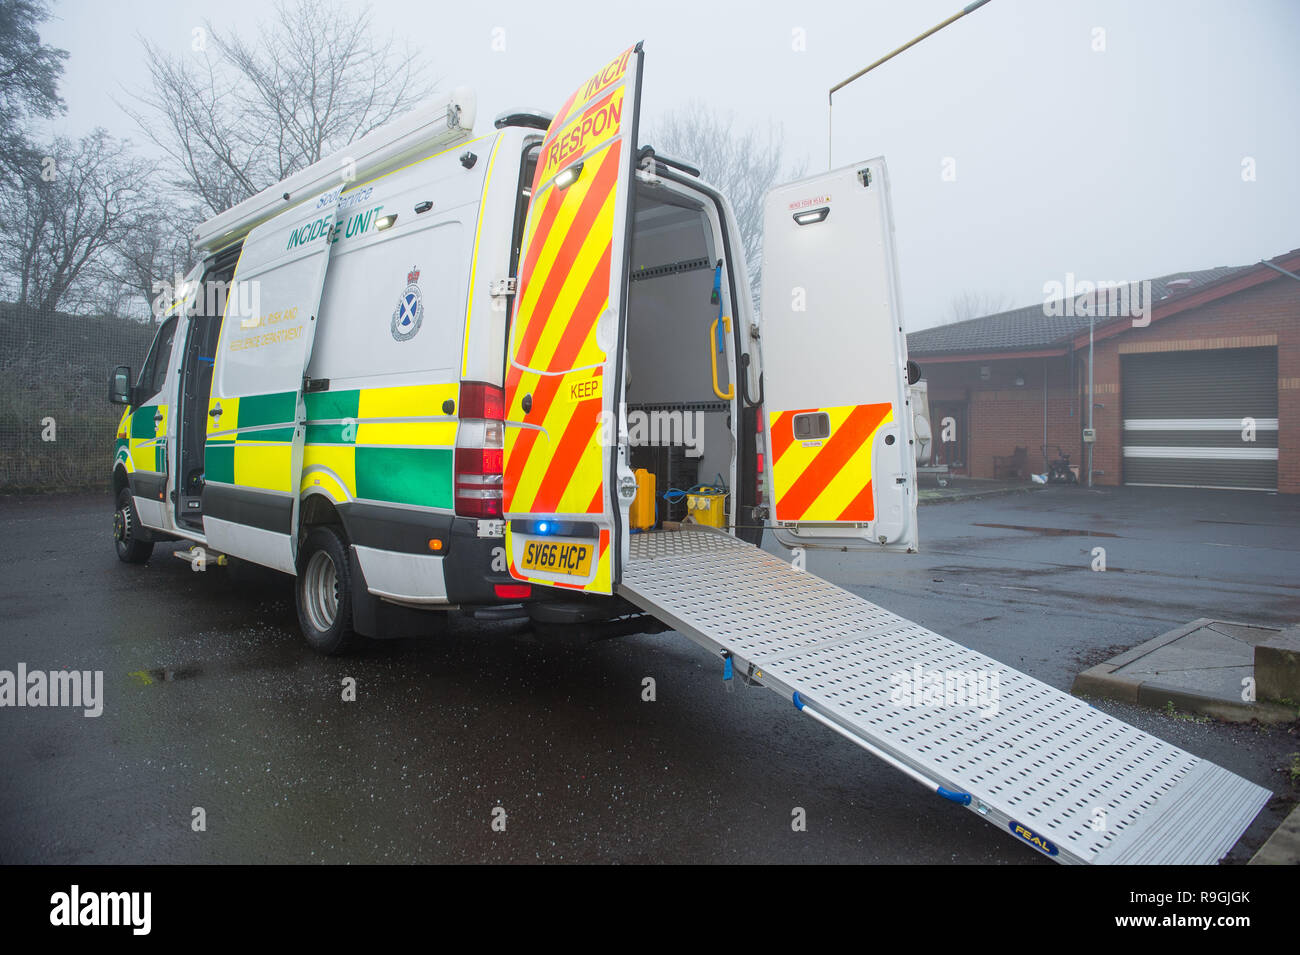 Johnstone, Glasgow, UK. 24th December 2018.  Scottish Health Minister - Jeane Freeman visits the Scottish Ambulance Service's Special Operations Response Team (SORT) where she  meets some of the paramedics who provide specialist ambulance care to patients during major incidents and in hazardous environments and being shown the specific equipment (ranging from bio hazards and ballistic suits, water rescue kit to ambulance specific kits to the actual specialist vehicles), used.  Credit: Colin Fisher/Alamy Live News Stock Photo